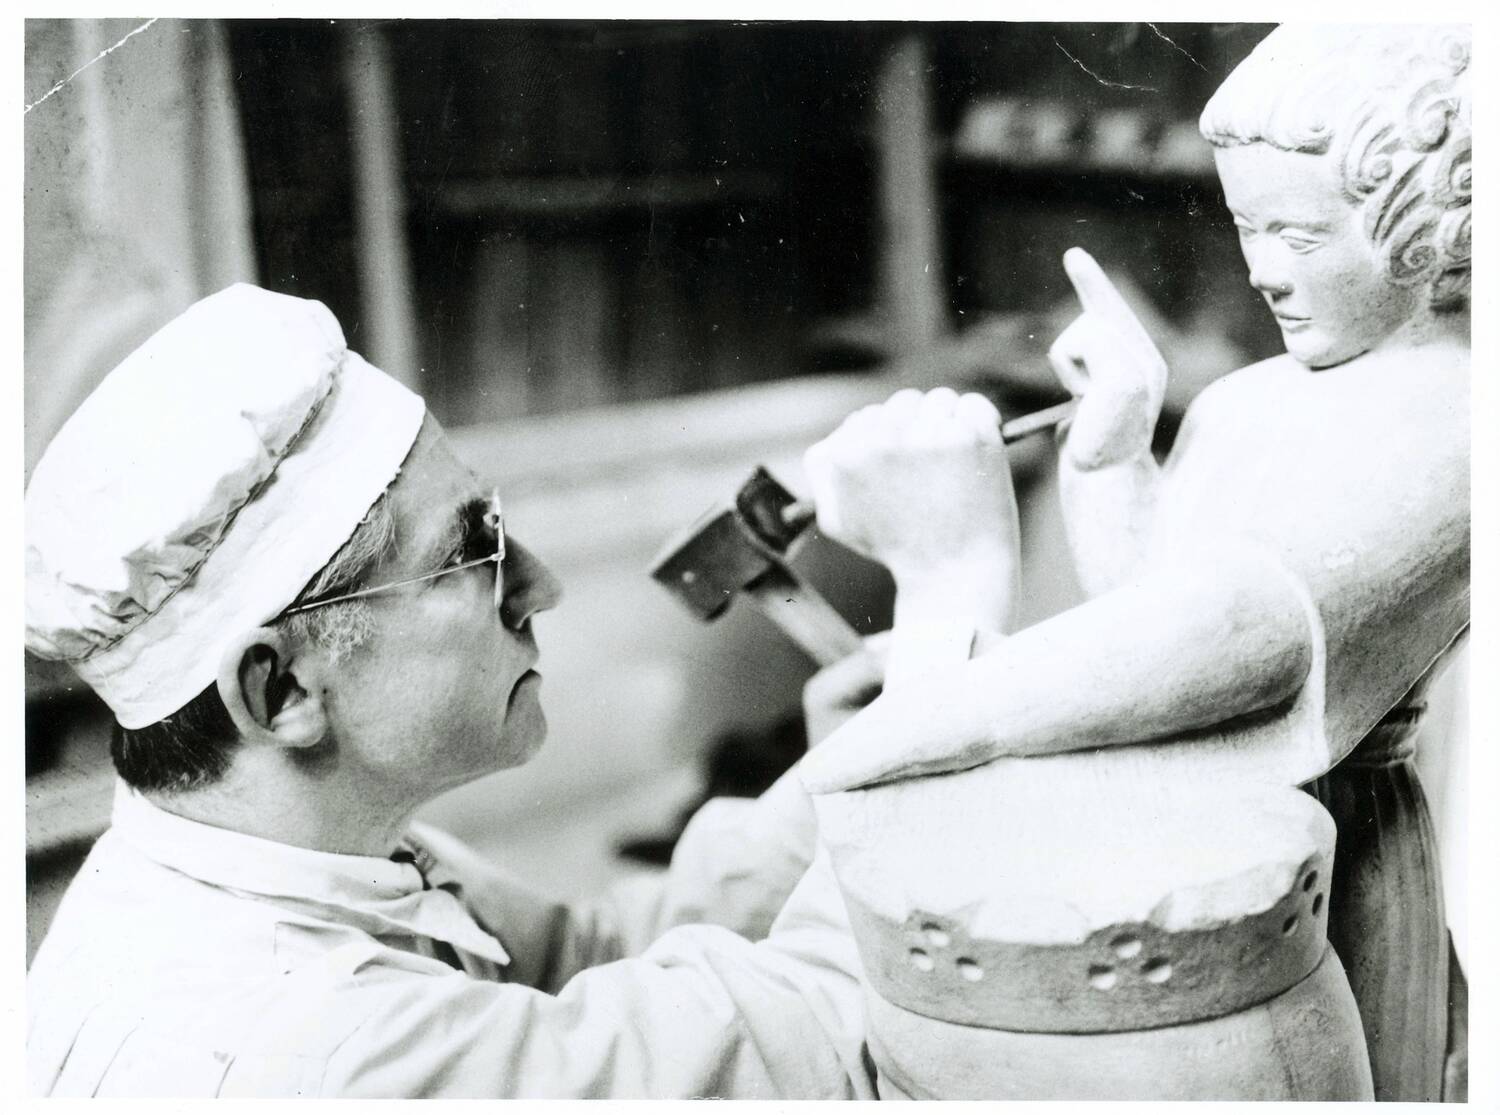 A black and white photo of a young man working on a sculpture of a cherub-type figure. He holds a small stone chisel and is working on the figure's hand. The statue and the man appear to be looking at each other eye to eye.